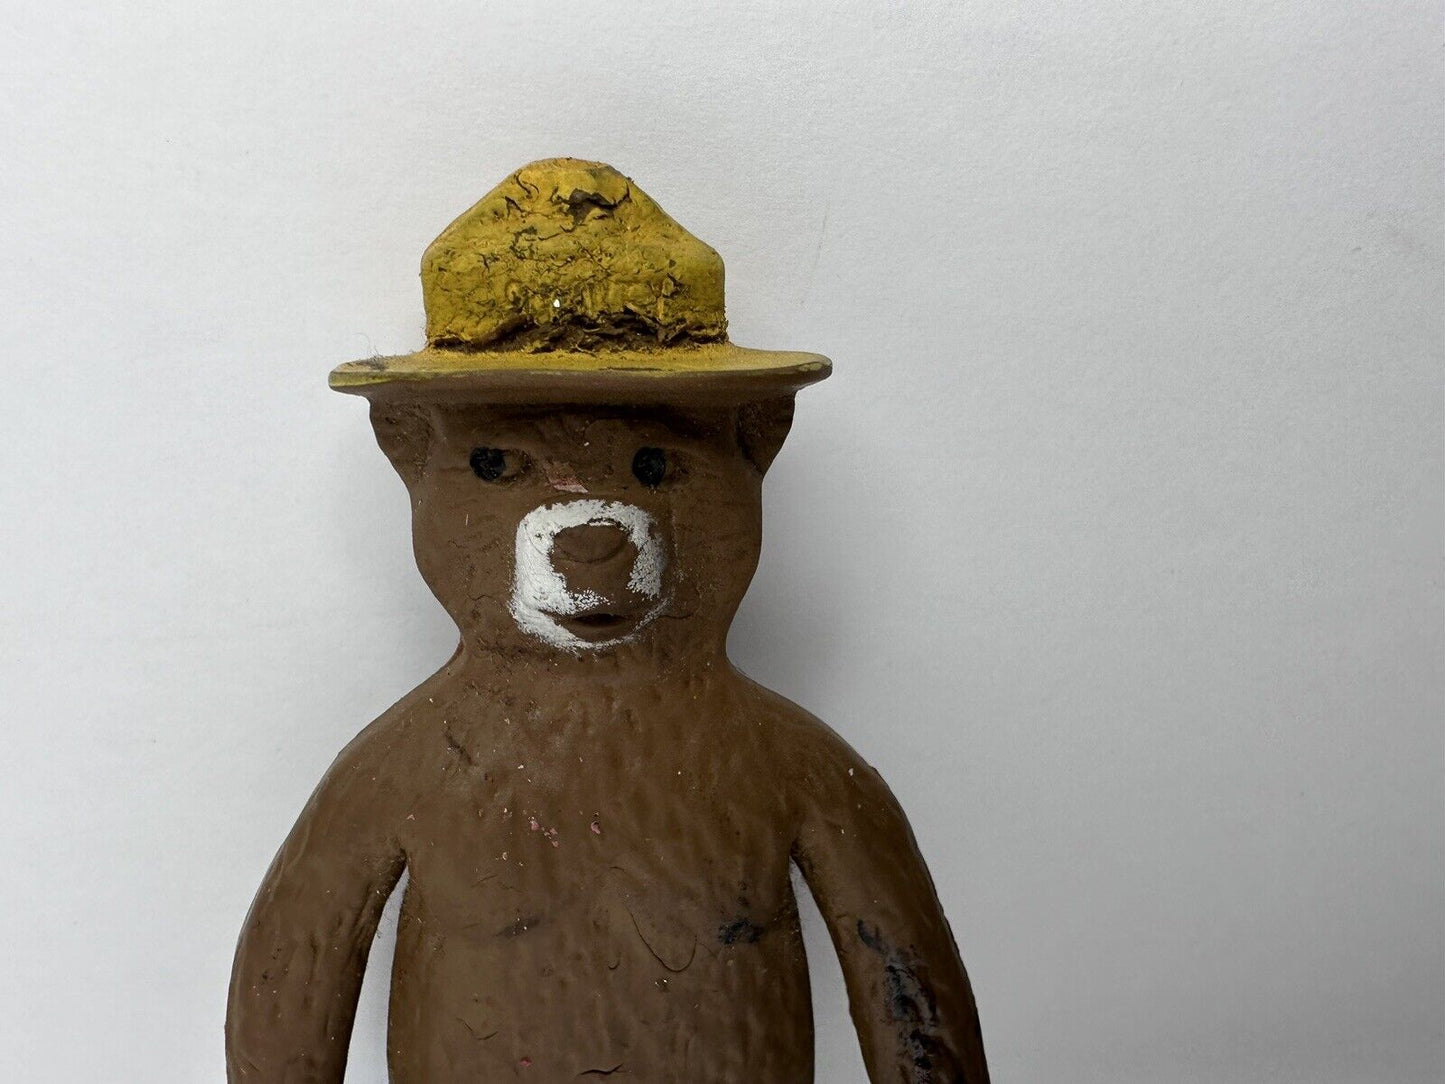 Authentic 1967 Vintage Smokey Bear Bendable Toy Doll - Rare Collectible 5.5" Figure - TreasuTiques